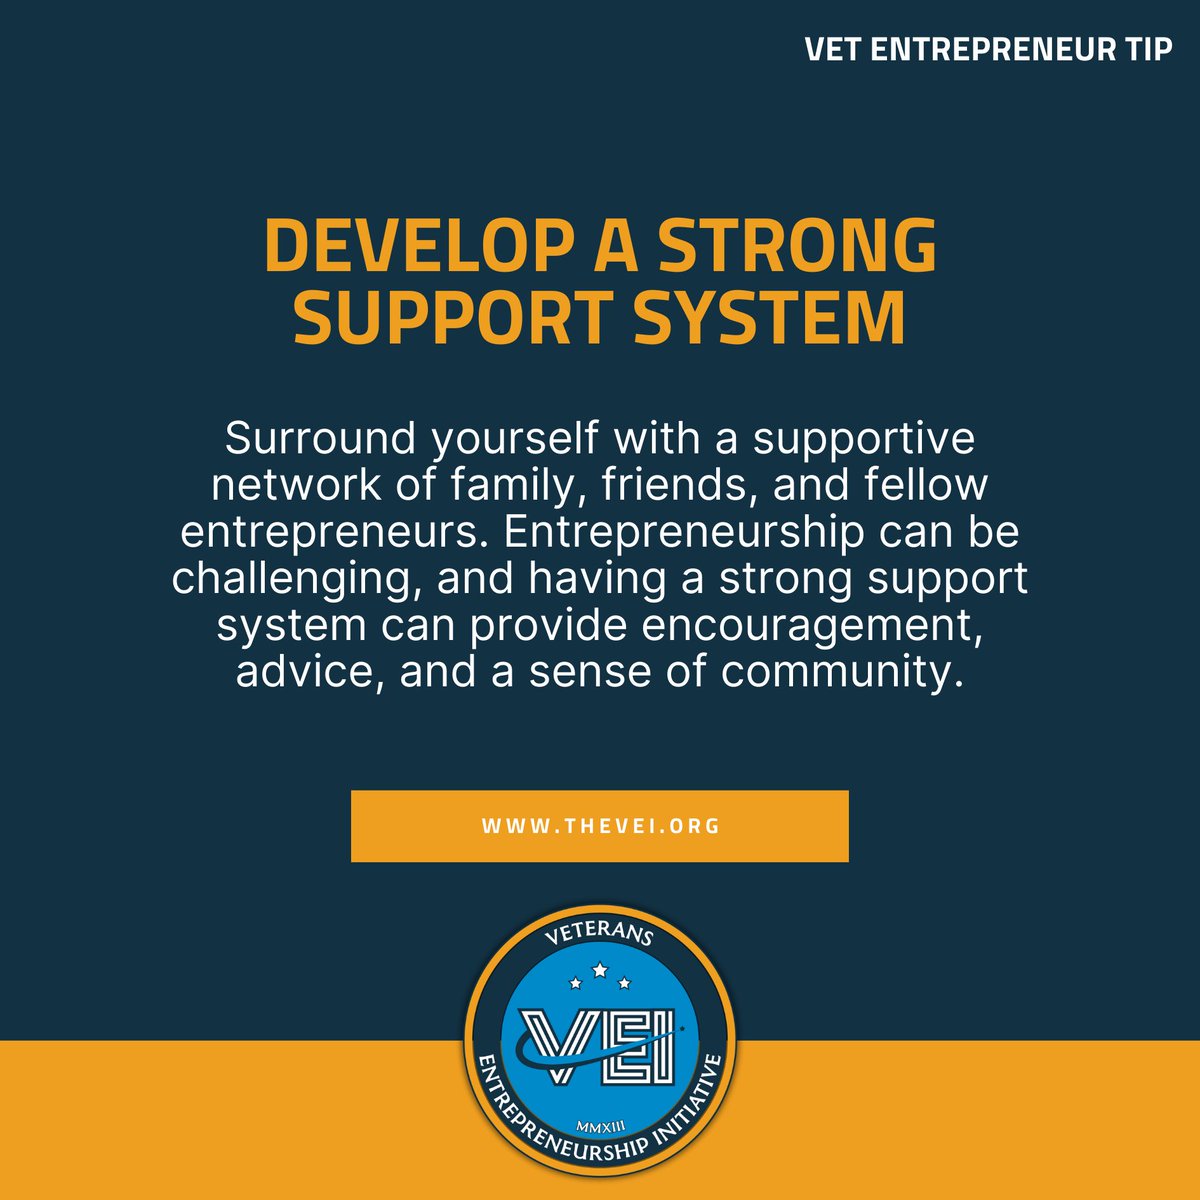 No entrepreneur is an island. Surround yourself with a support system that uplifts, inspires, and fuels your entrepreneurial journey. Together, we can conquer the world. Build your support network at TheVEI.org. #EntrepreneurCommunity #TheVEI